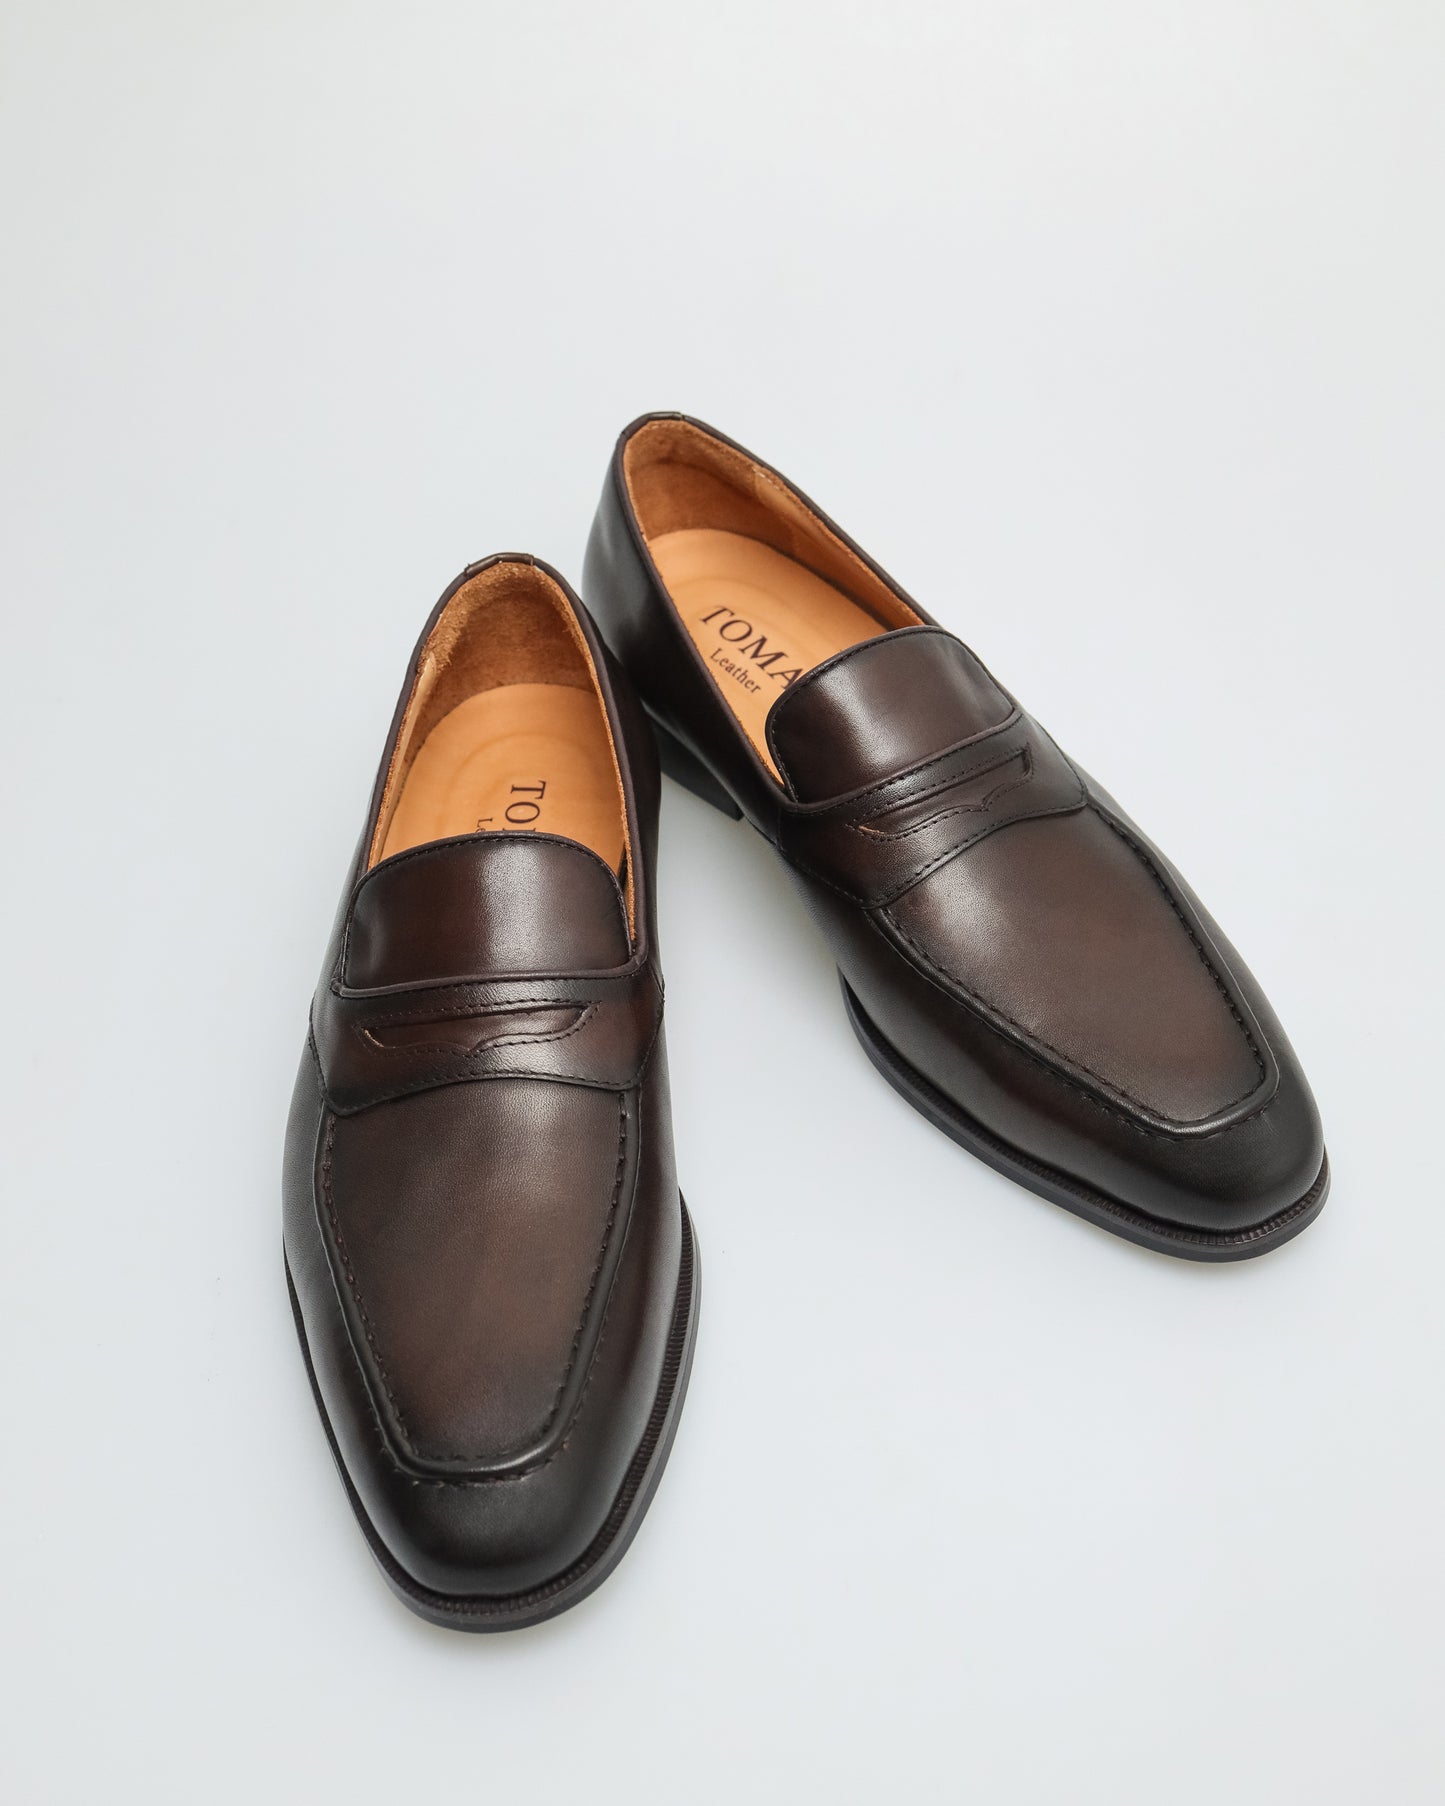 Tomaz F354 Men's Penny Loafers (Coffee)